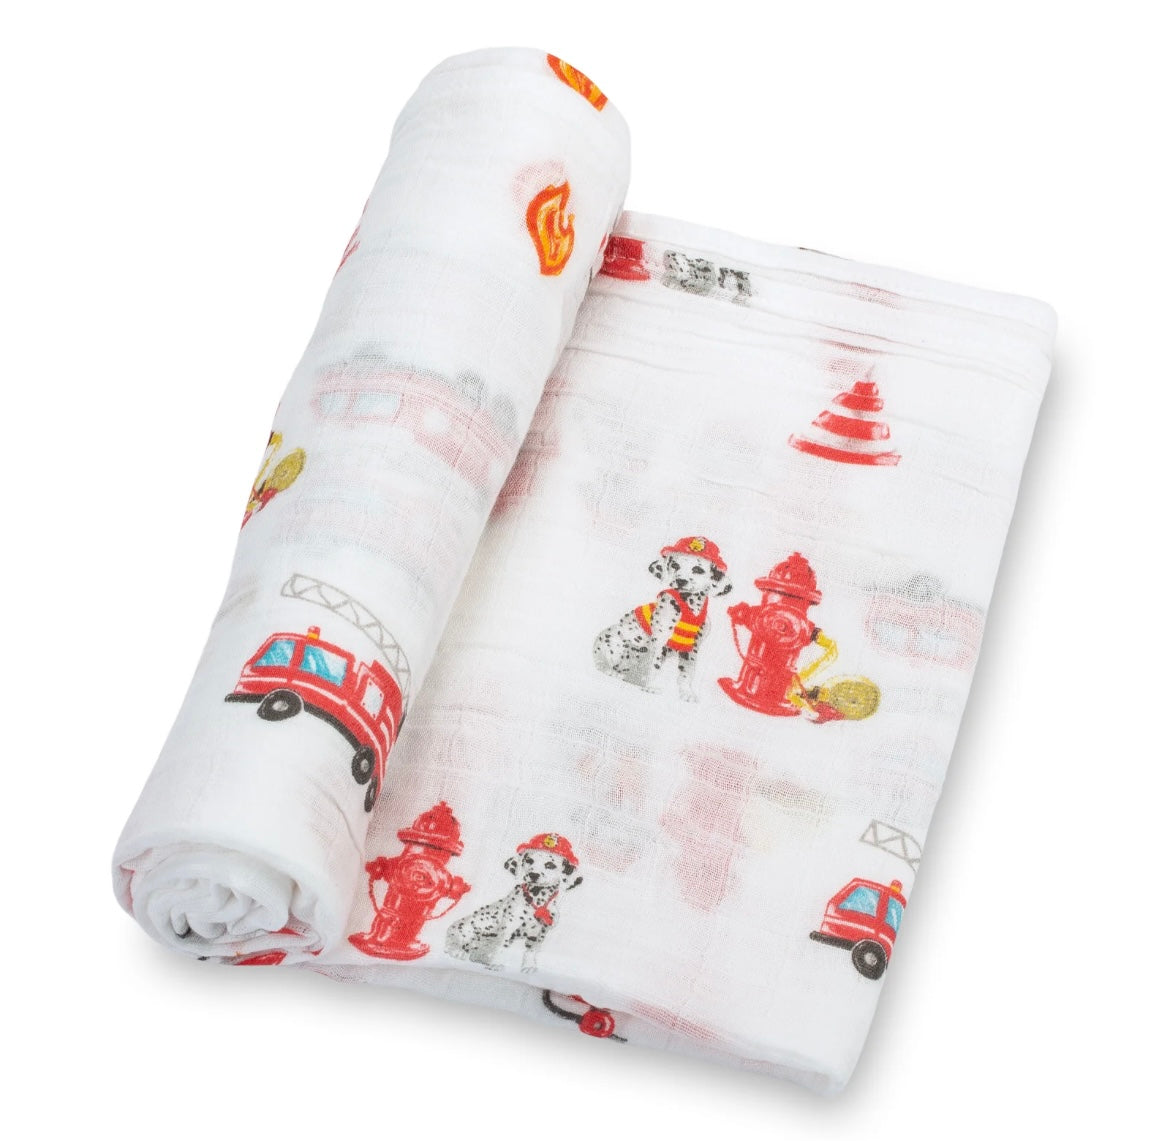 NWT Lolly Banks Fireman Baby Muslin Swaddle Blanket